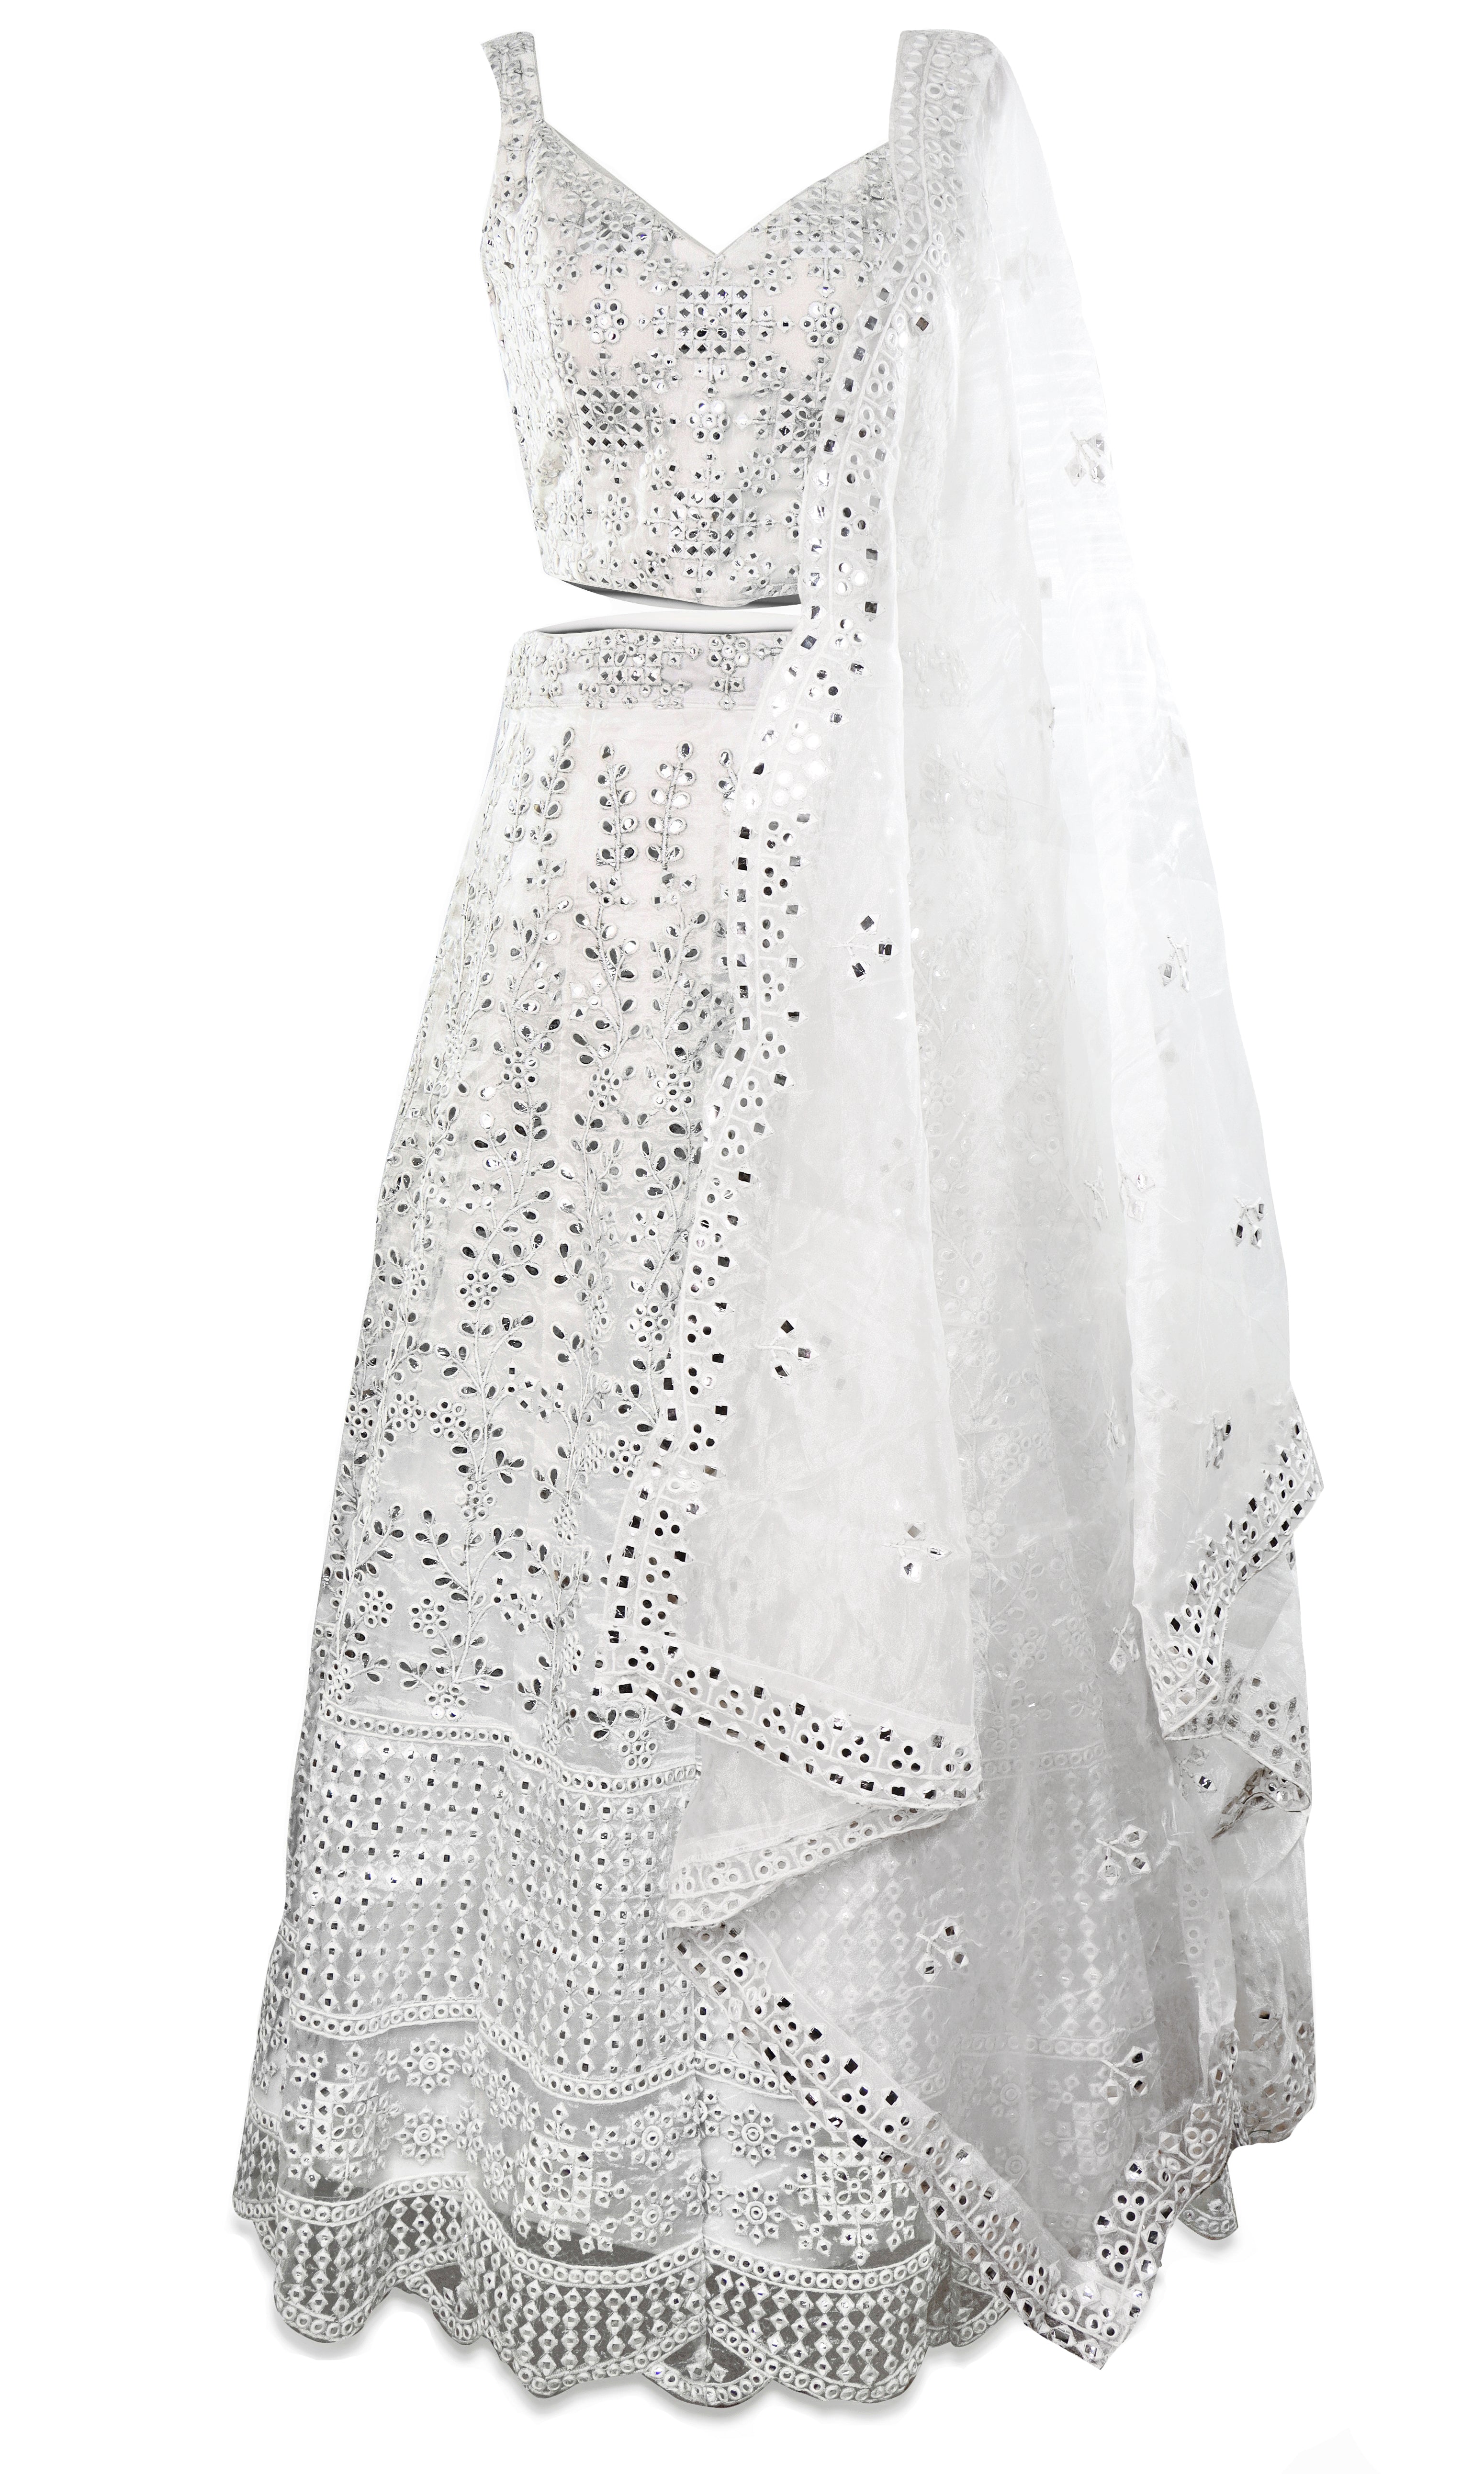 White gorgeous lehenga is all white and decked out with stunning mirror work all throughout.